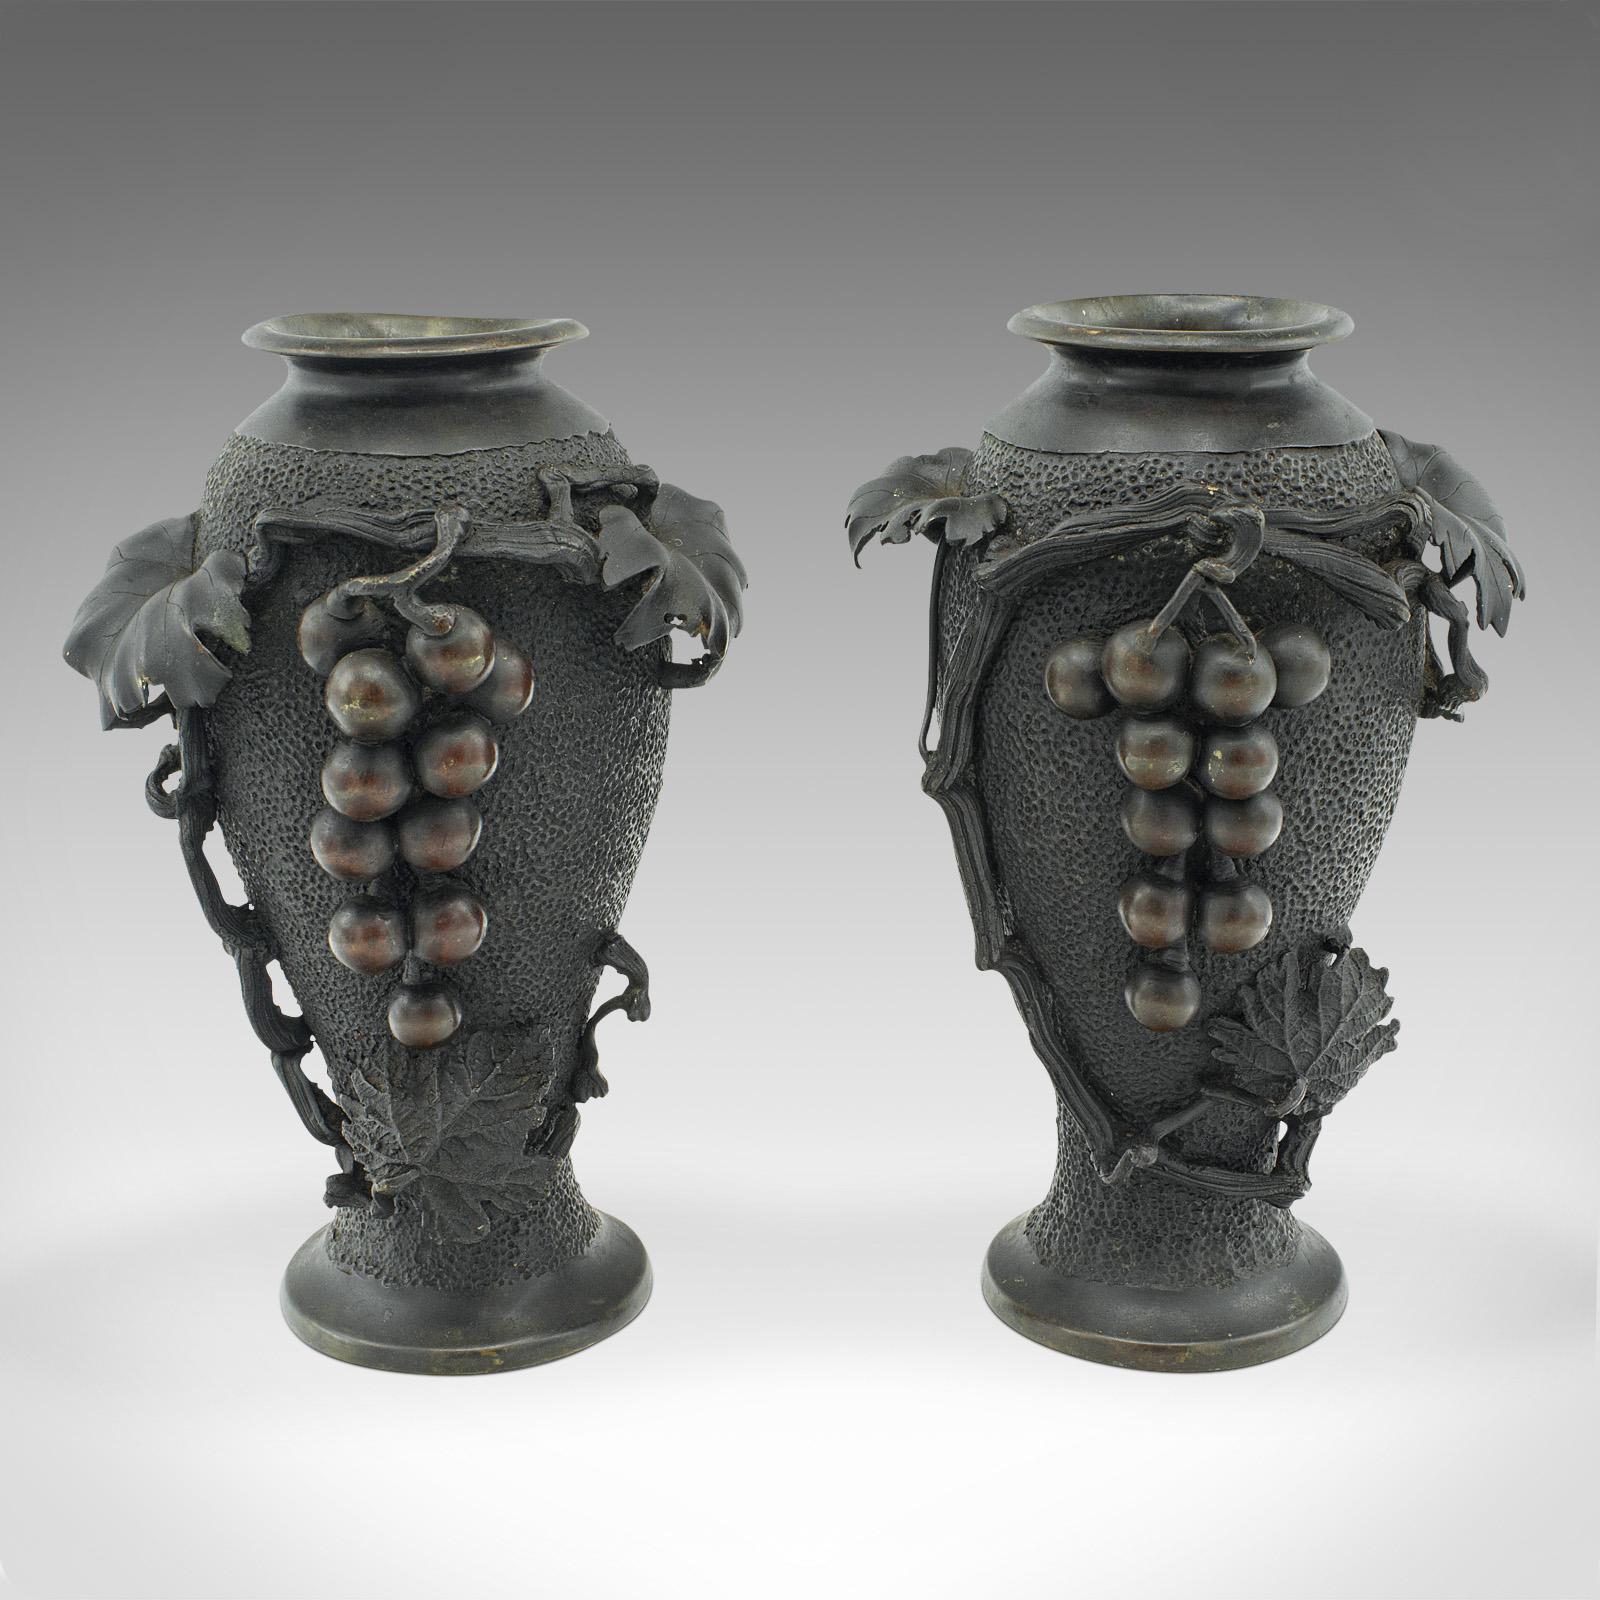 This is a pair of antique decorative vases. A Japanese, bronze baluster from the Meiji period, dating to the mid Victorian period, circa 1870.

Strikingly sculpted and finished vases of appealing proportion
Displaying a desirable aged patina
Dark